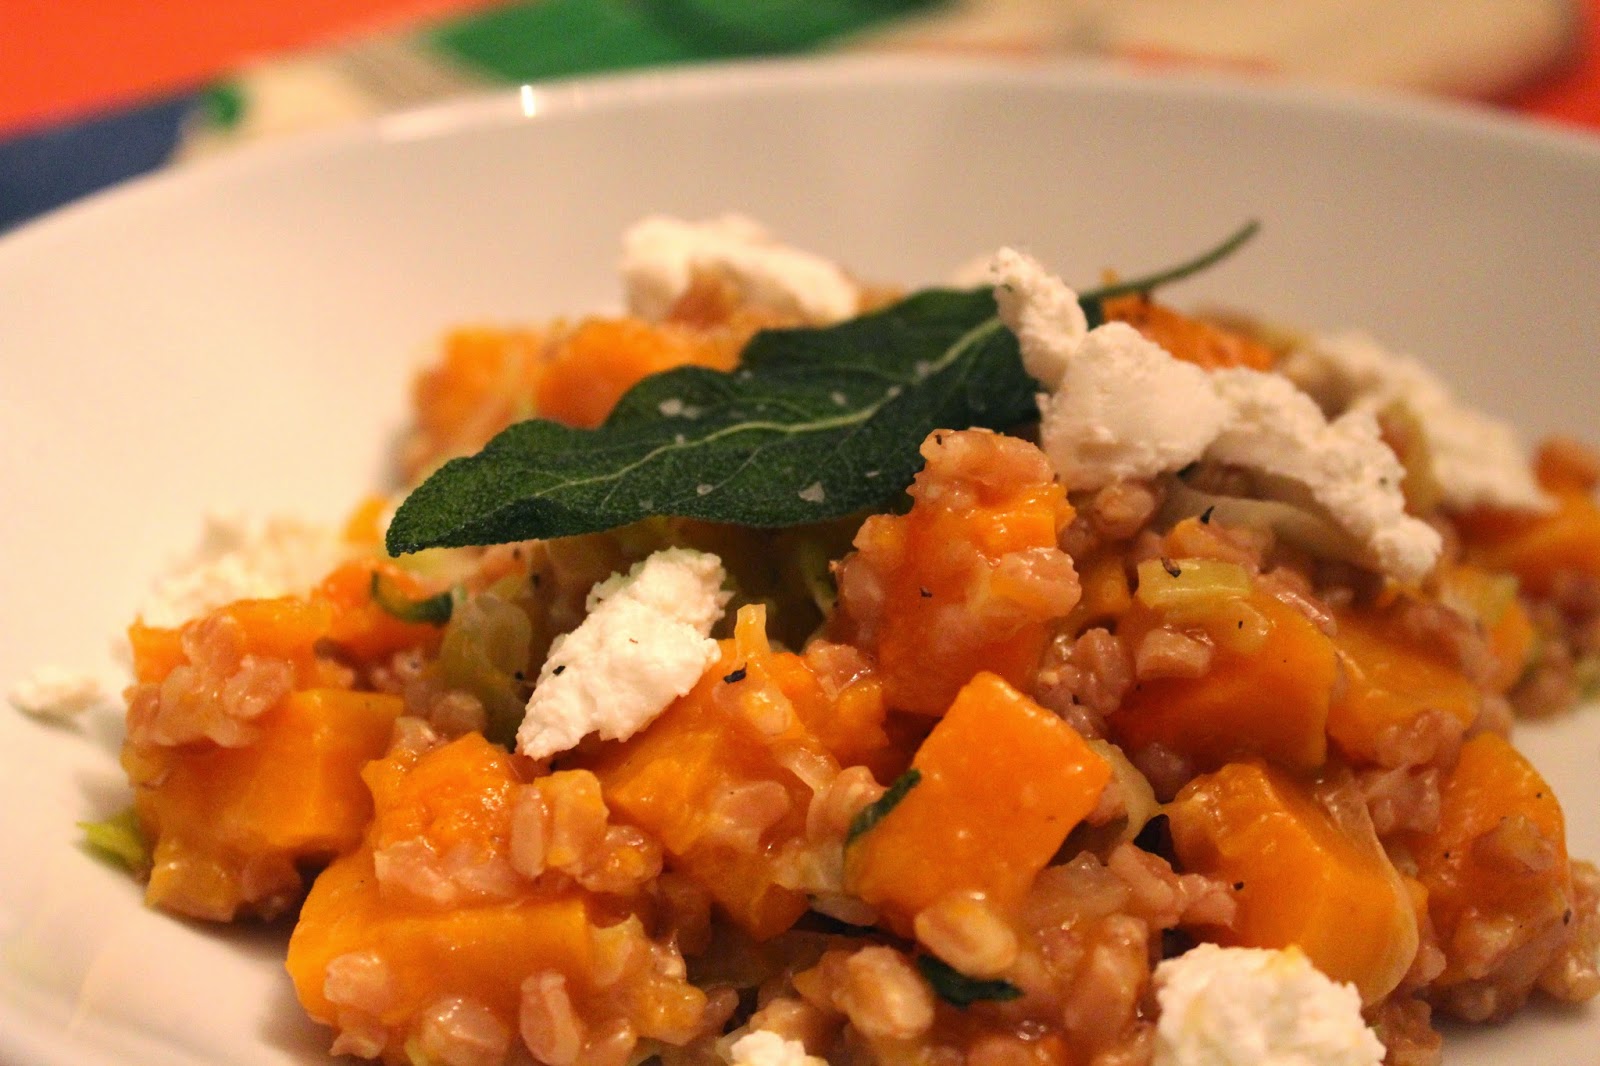 Farrotto with butternut squash, sage, and goat cheese